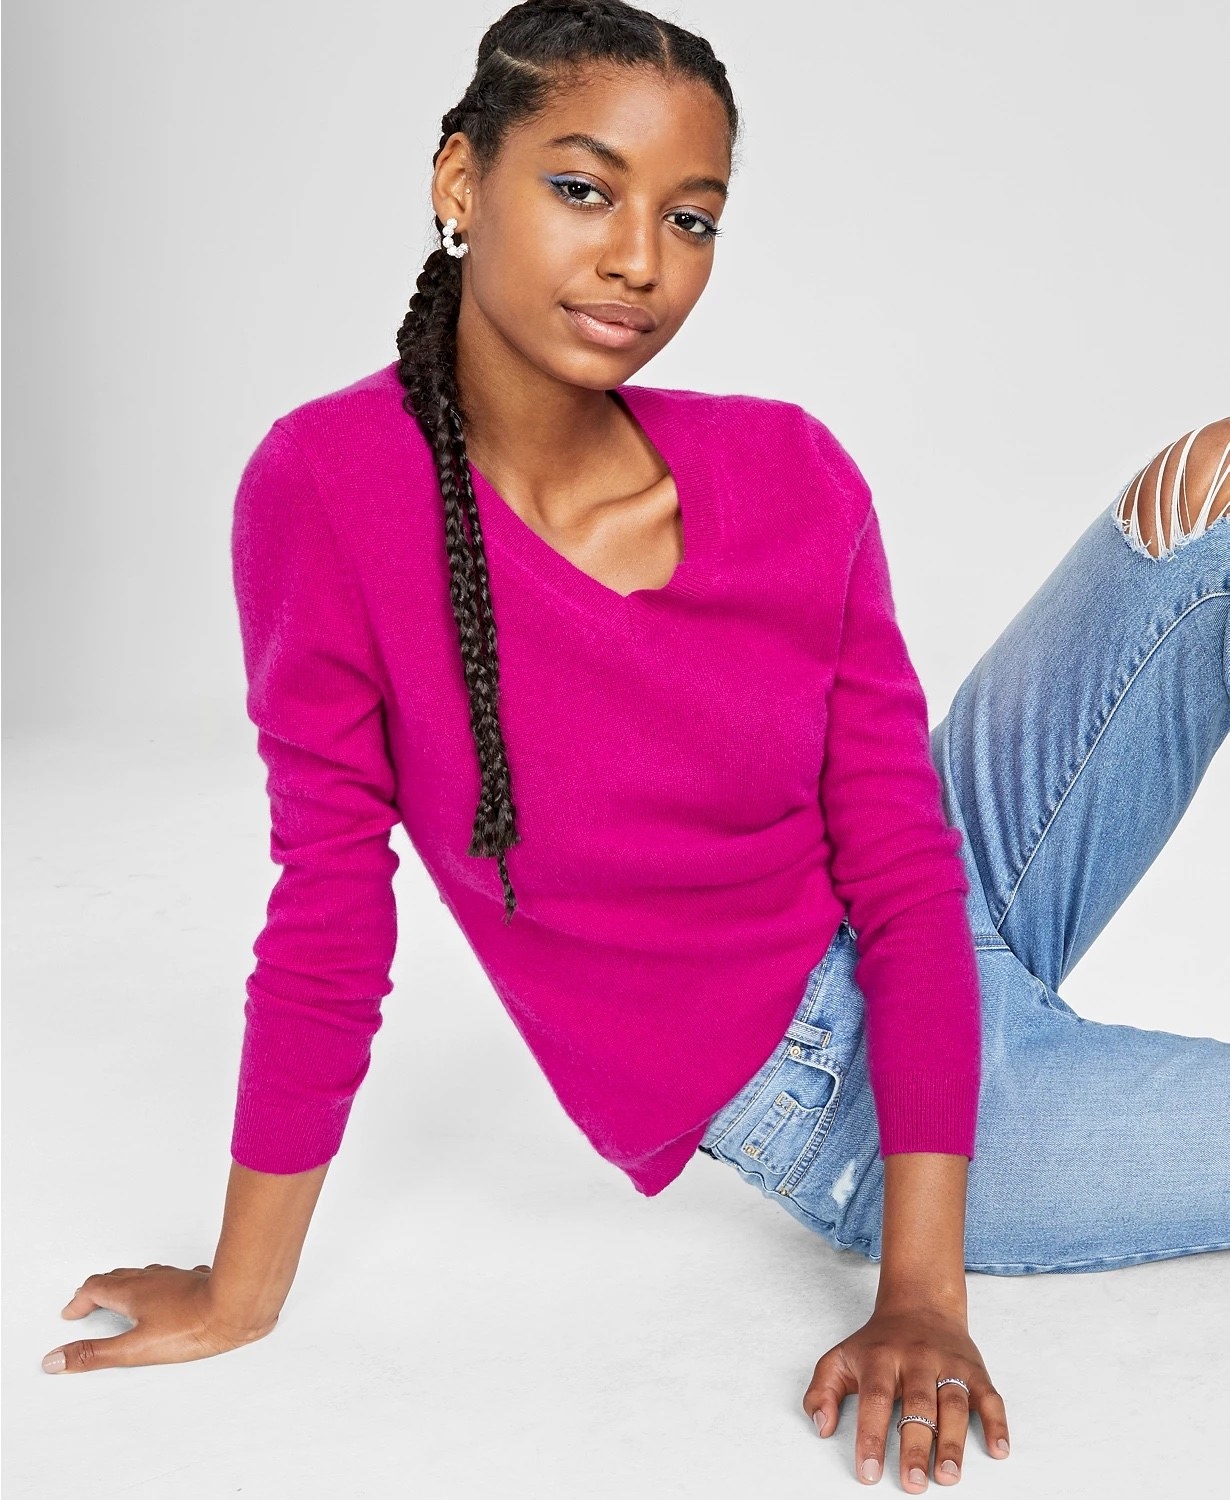 Model wearing bright pink sweater with lightwash jeans